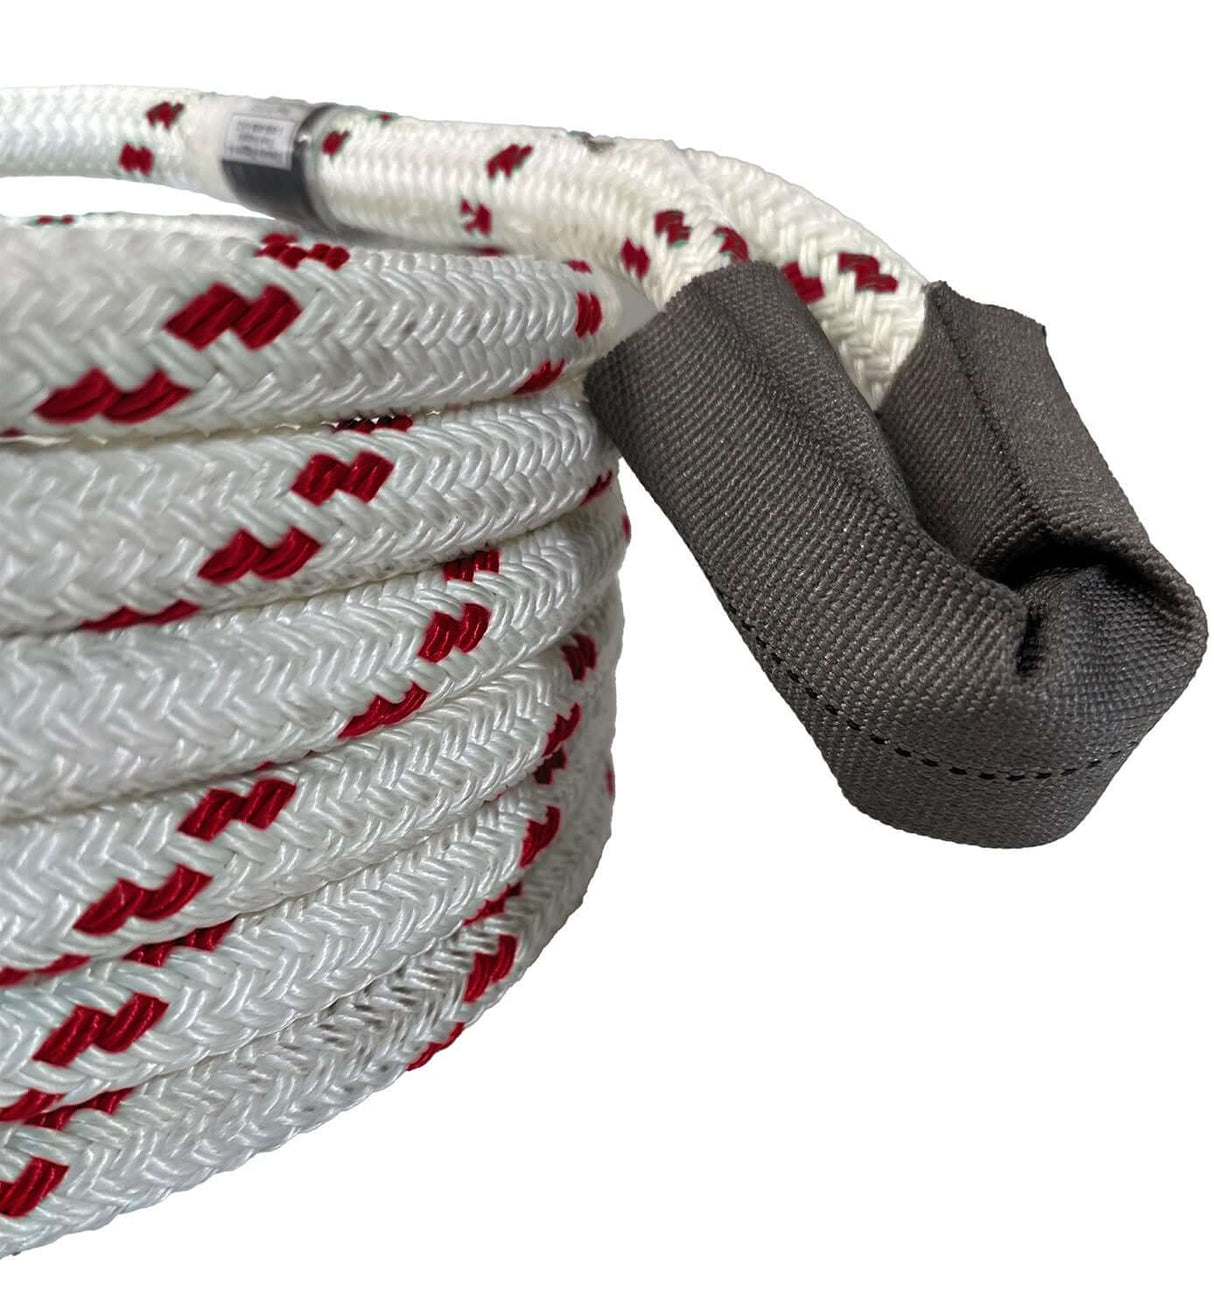 Tow Strap with Hooks 2”x20' 15,000 LBS, Tow Rope Metal Safety Hooks, Car  Heavy Duty Recovery Rope for Trailers, Securing Items, and Farm Cleaning